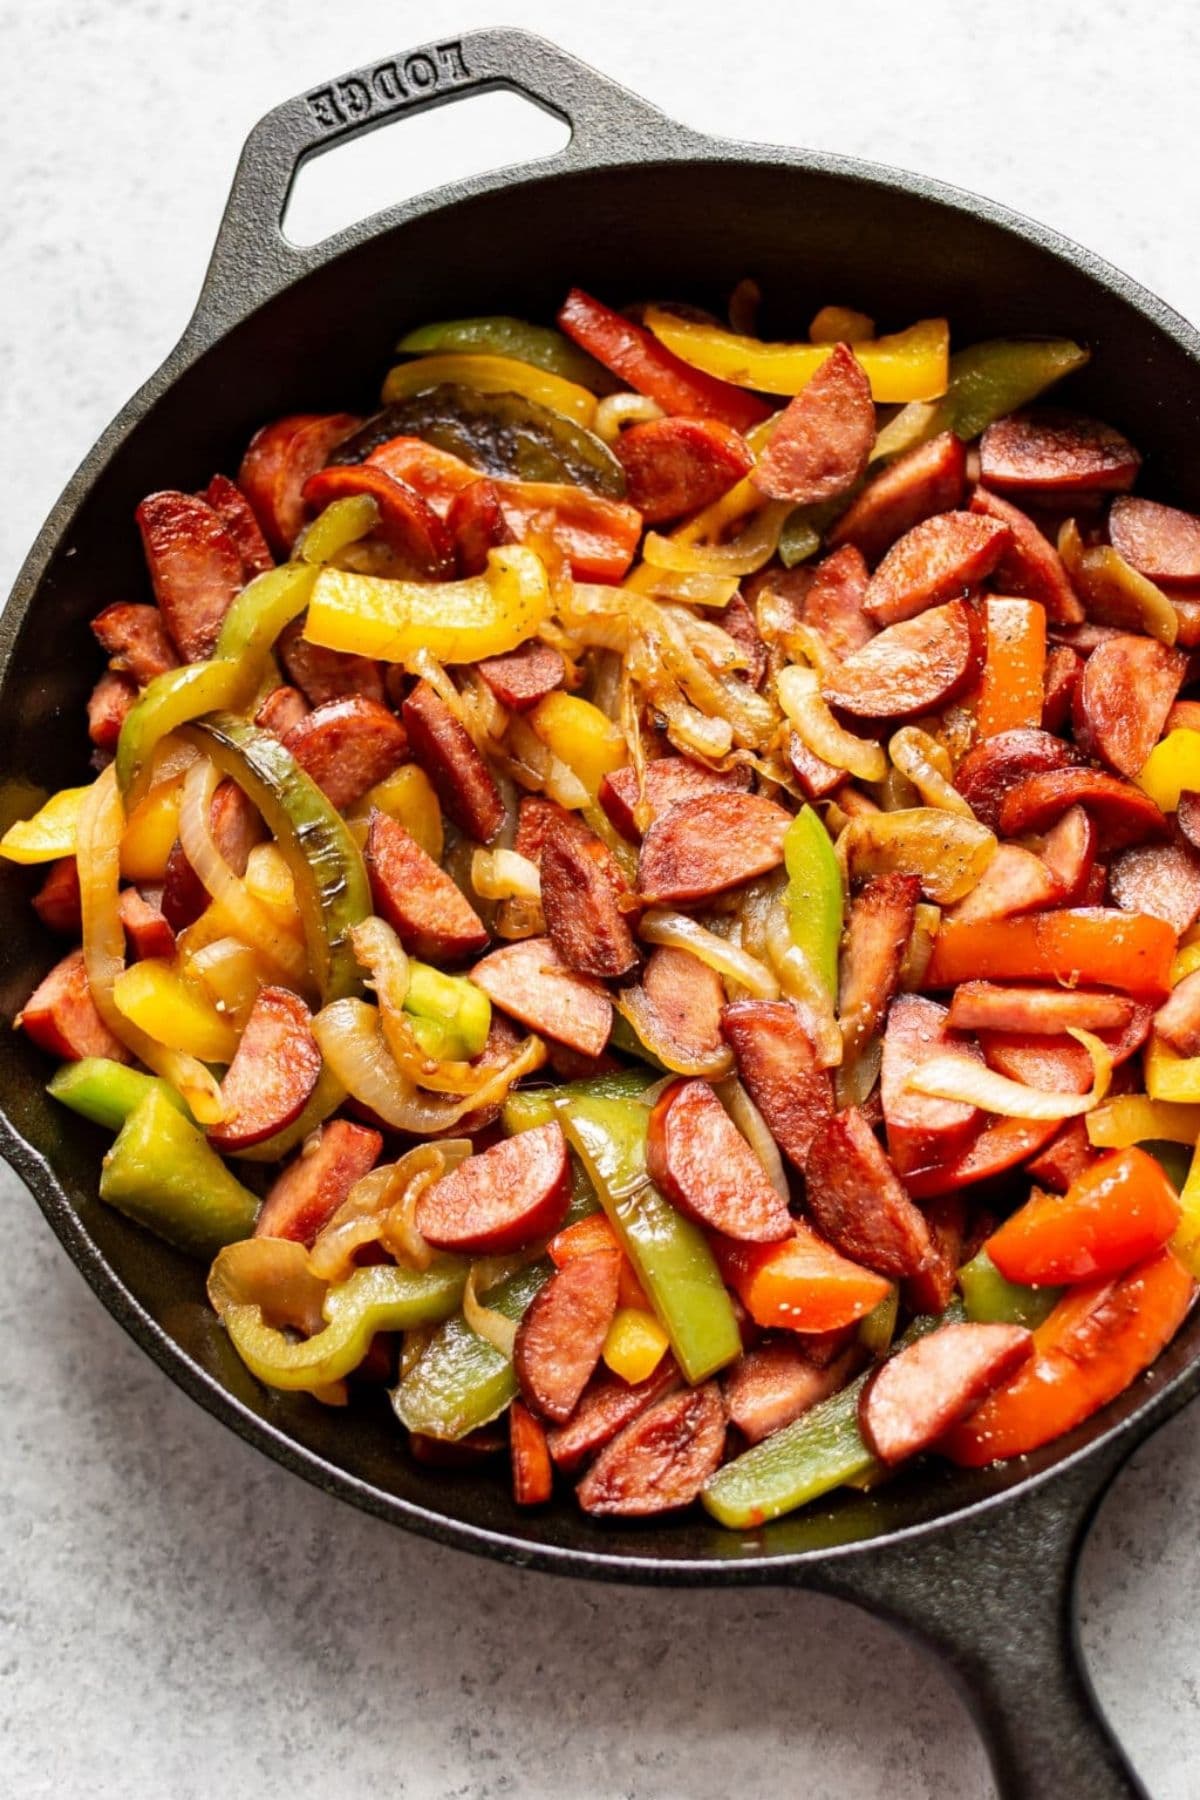 Cast iron skillet filled with sausage and peppers